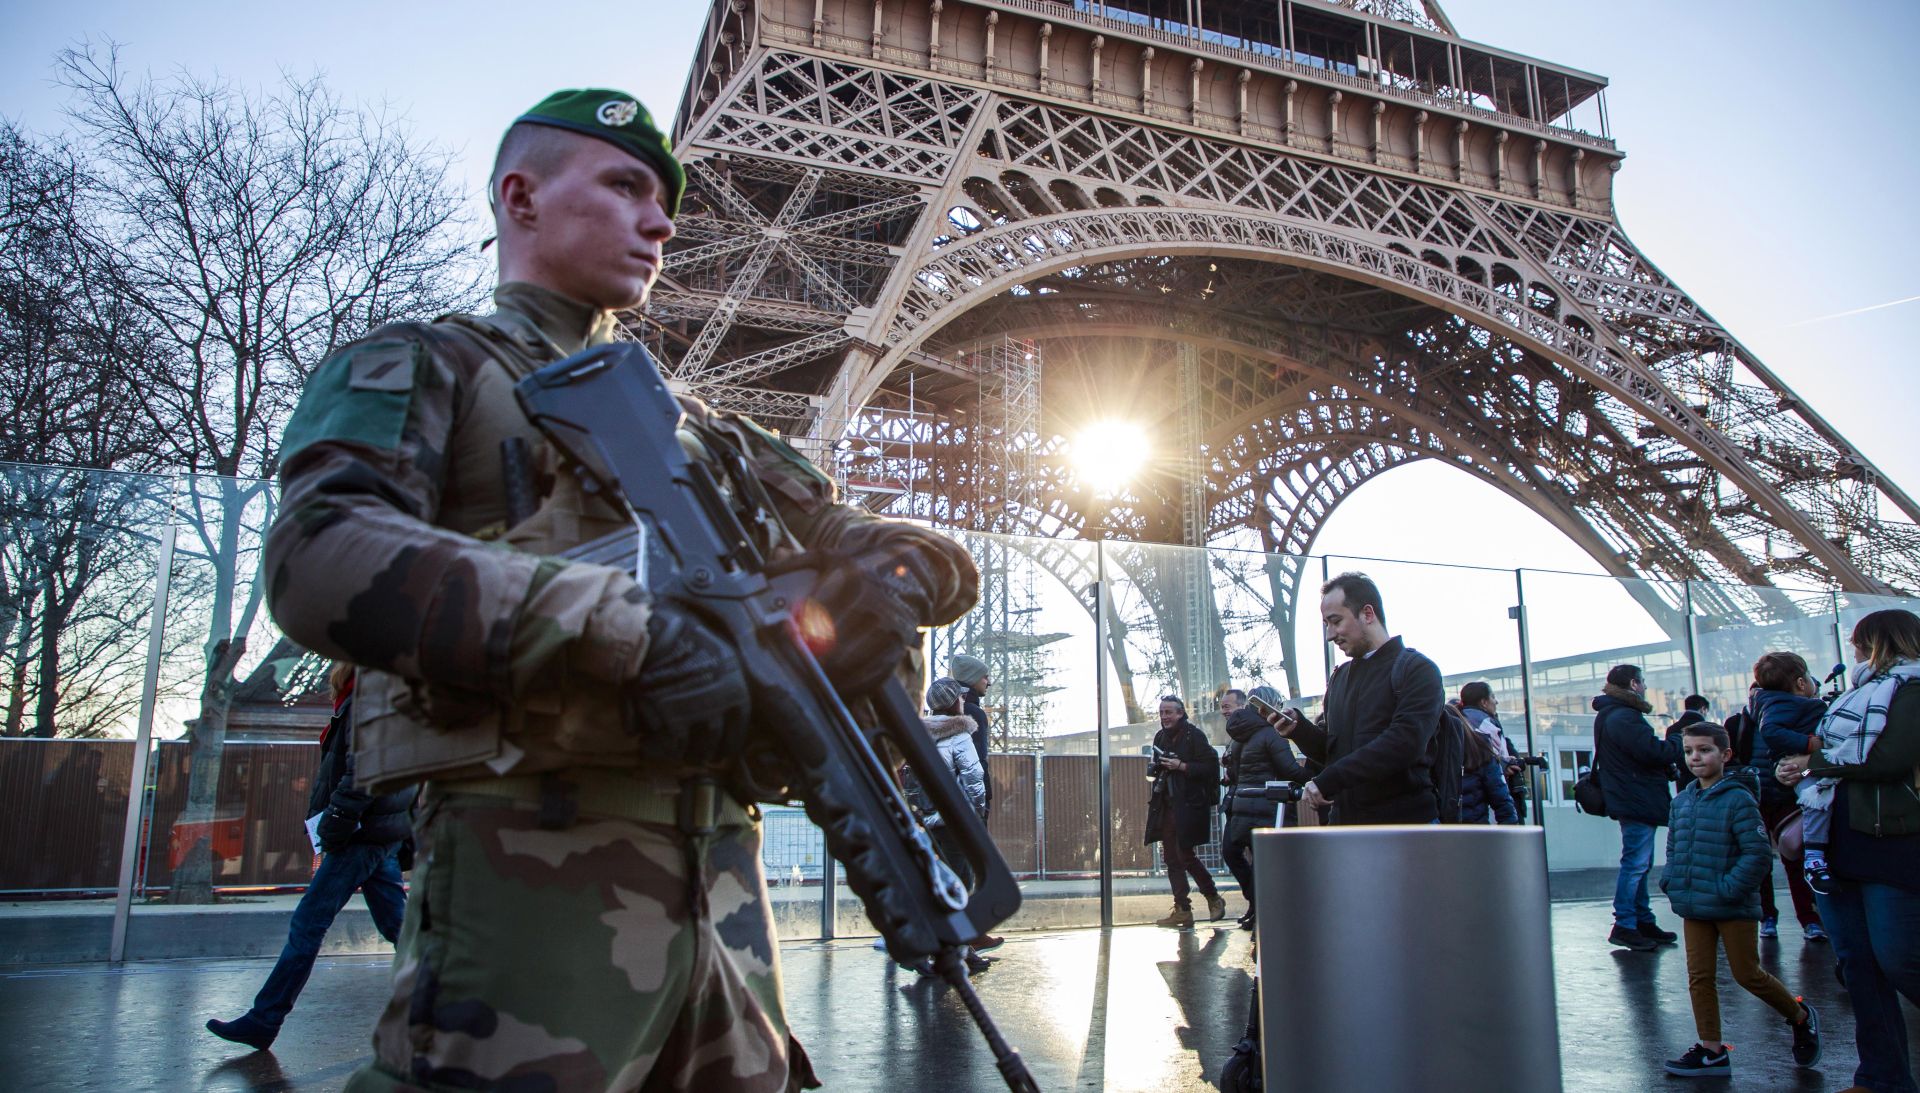 epa08094804 A French soldier from the 'Sentinelle military Operation' stands guard as Interior Minister Castaner  (unseen) visits the security forces securing the Eiffel Tower  to discuss New Year holiday security measures in Paris, France, 30 December 2019.  EPA/CHRISTOPHE PETIT TESSON